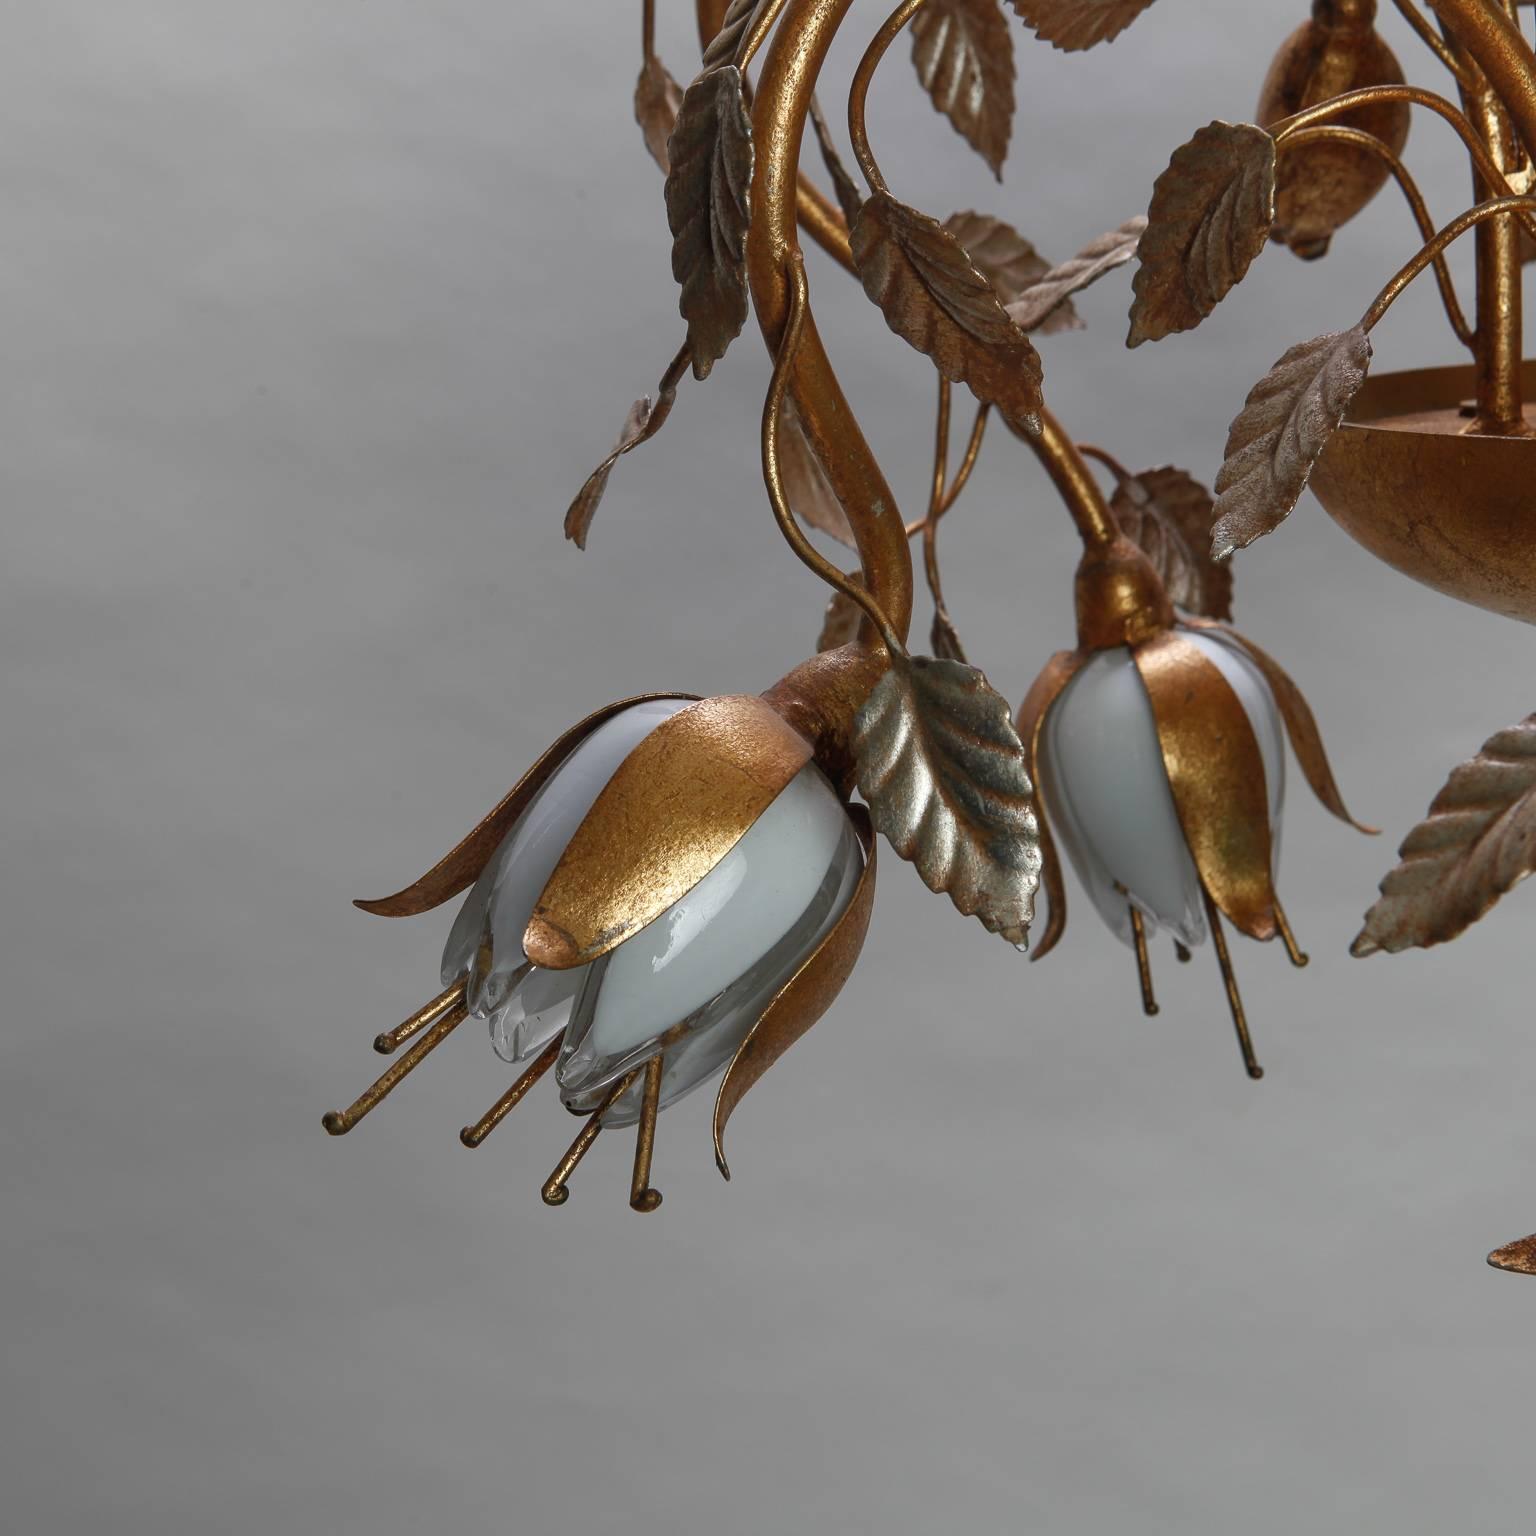 Silver gilt shaft, gold tole leaves and flowers. Tulip petals are made of handblown clear and white glass. Each bloom has a candelabra socket - nine total.
